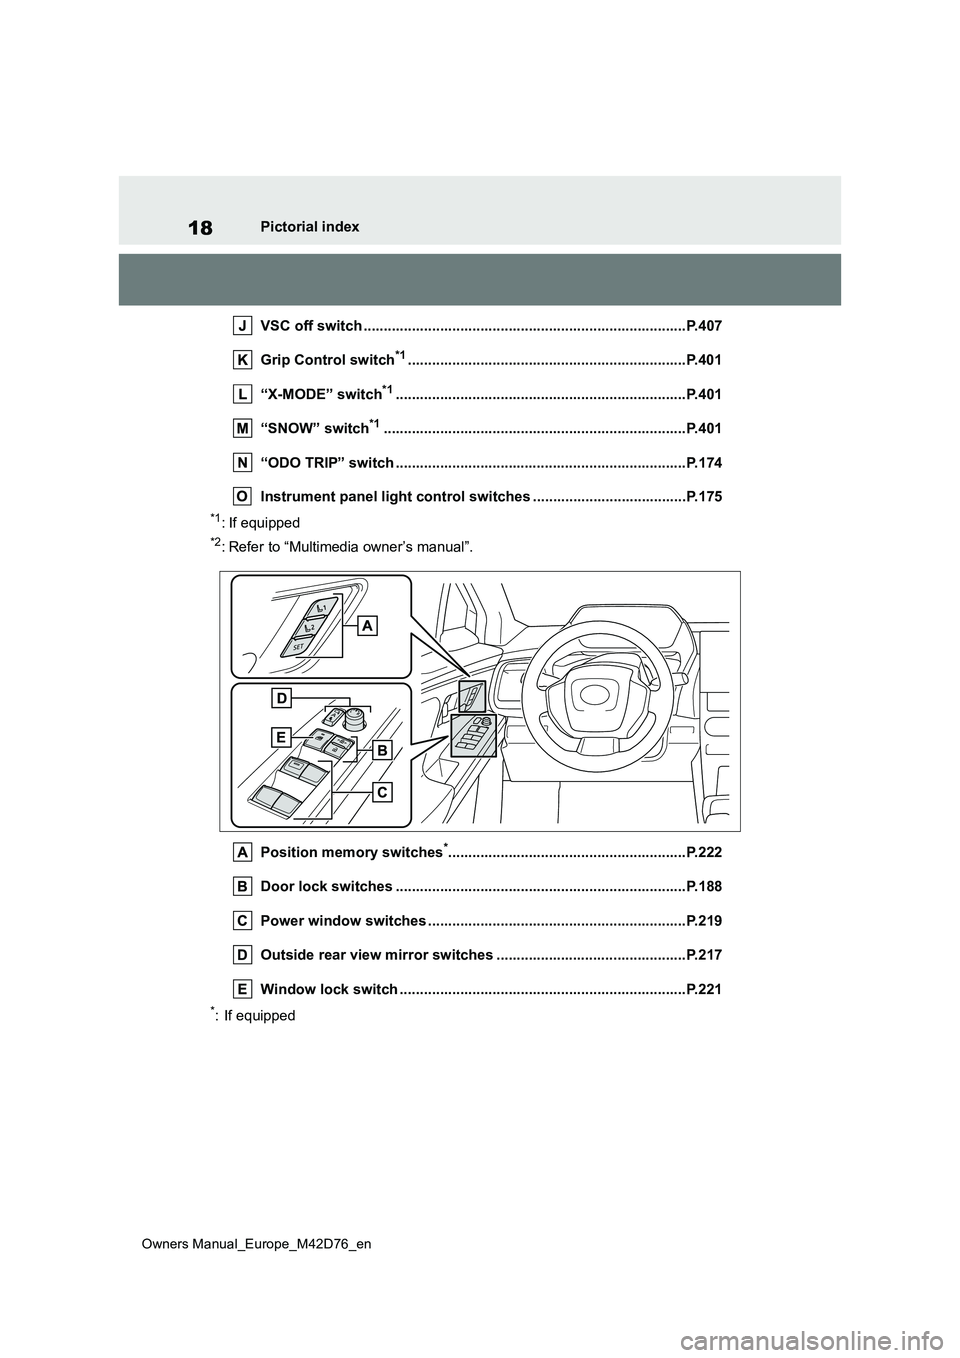 TOYOTA BZ4X 2022  Owners Manual (in English) 18
Owners Manual_Europe_M42D76_en
Pictorial index 
VSC off switch ................................................. ...............................P.407 
Grip Control switch*1.........................